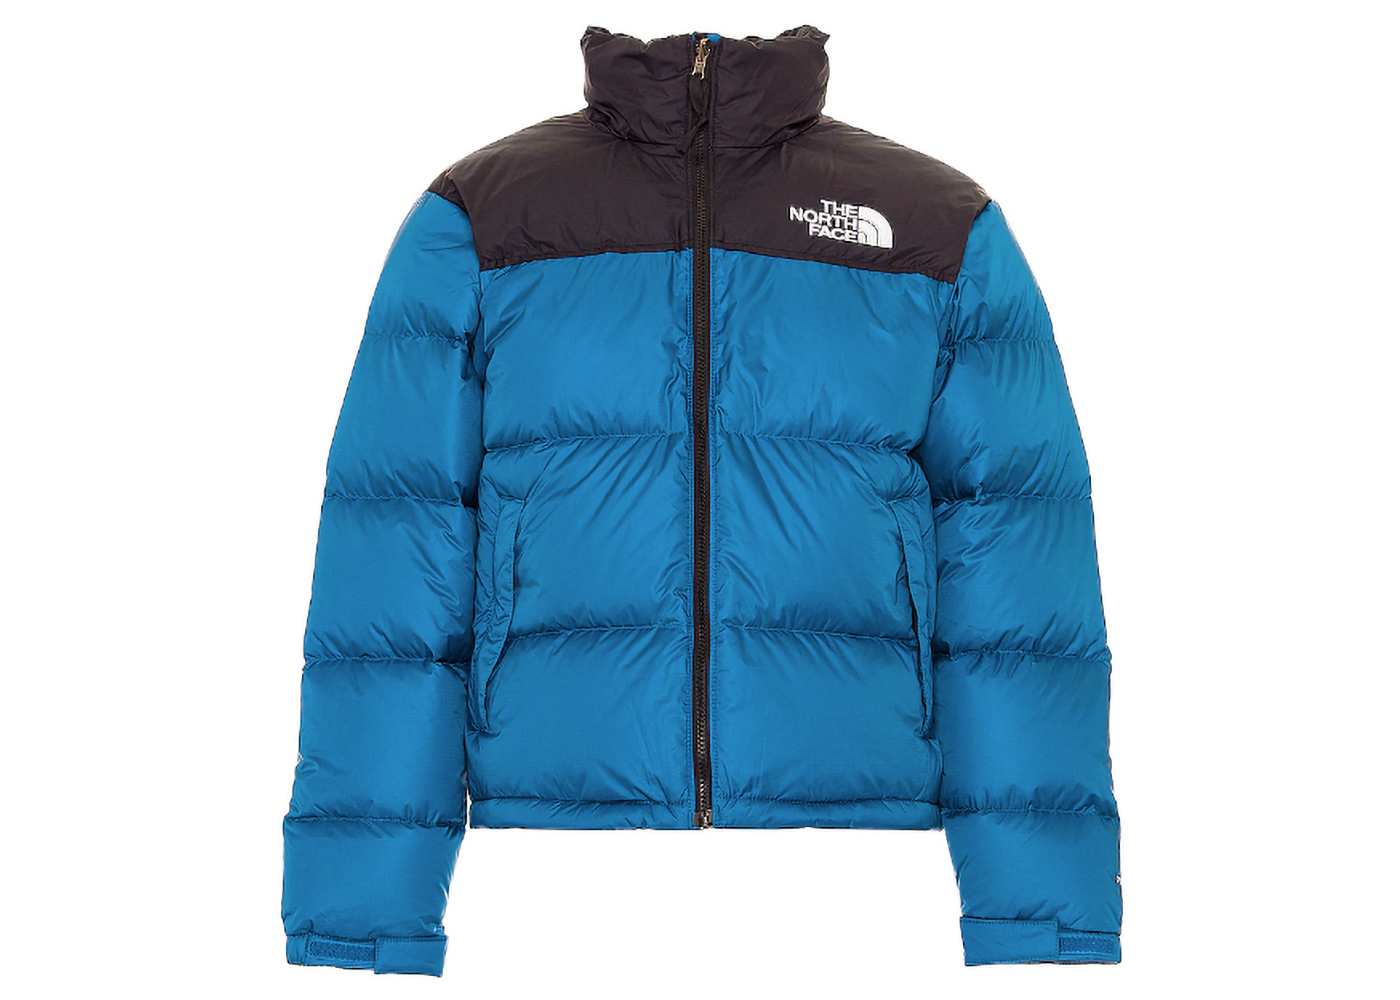 The North Face 1996 Retro Nuptse 700 Fill Packable Jacket Banff